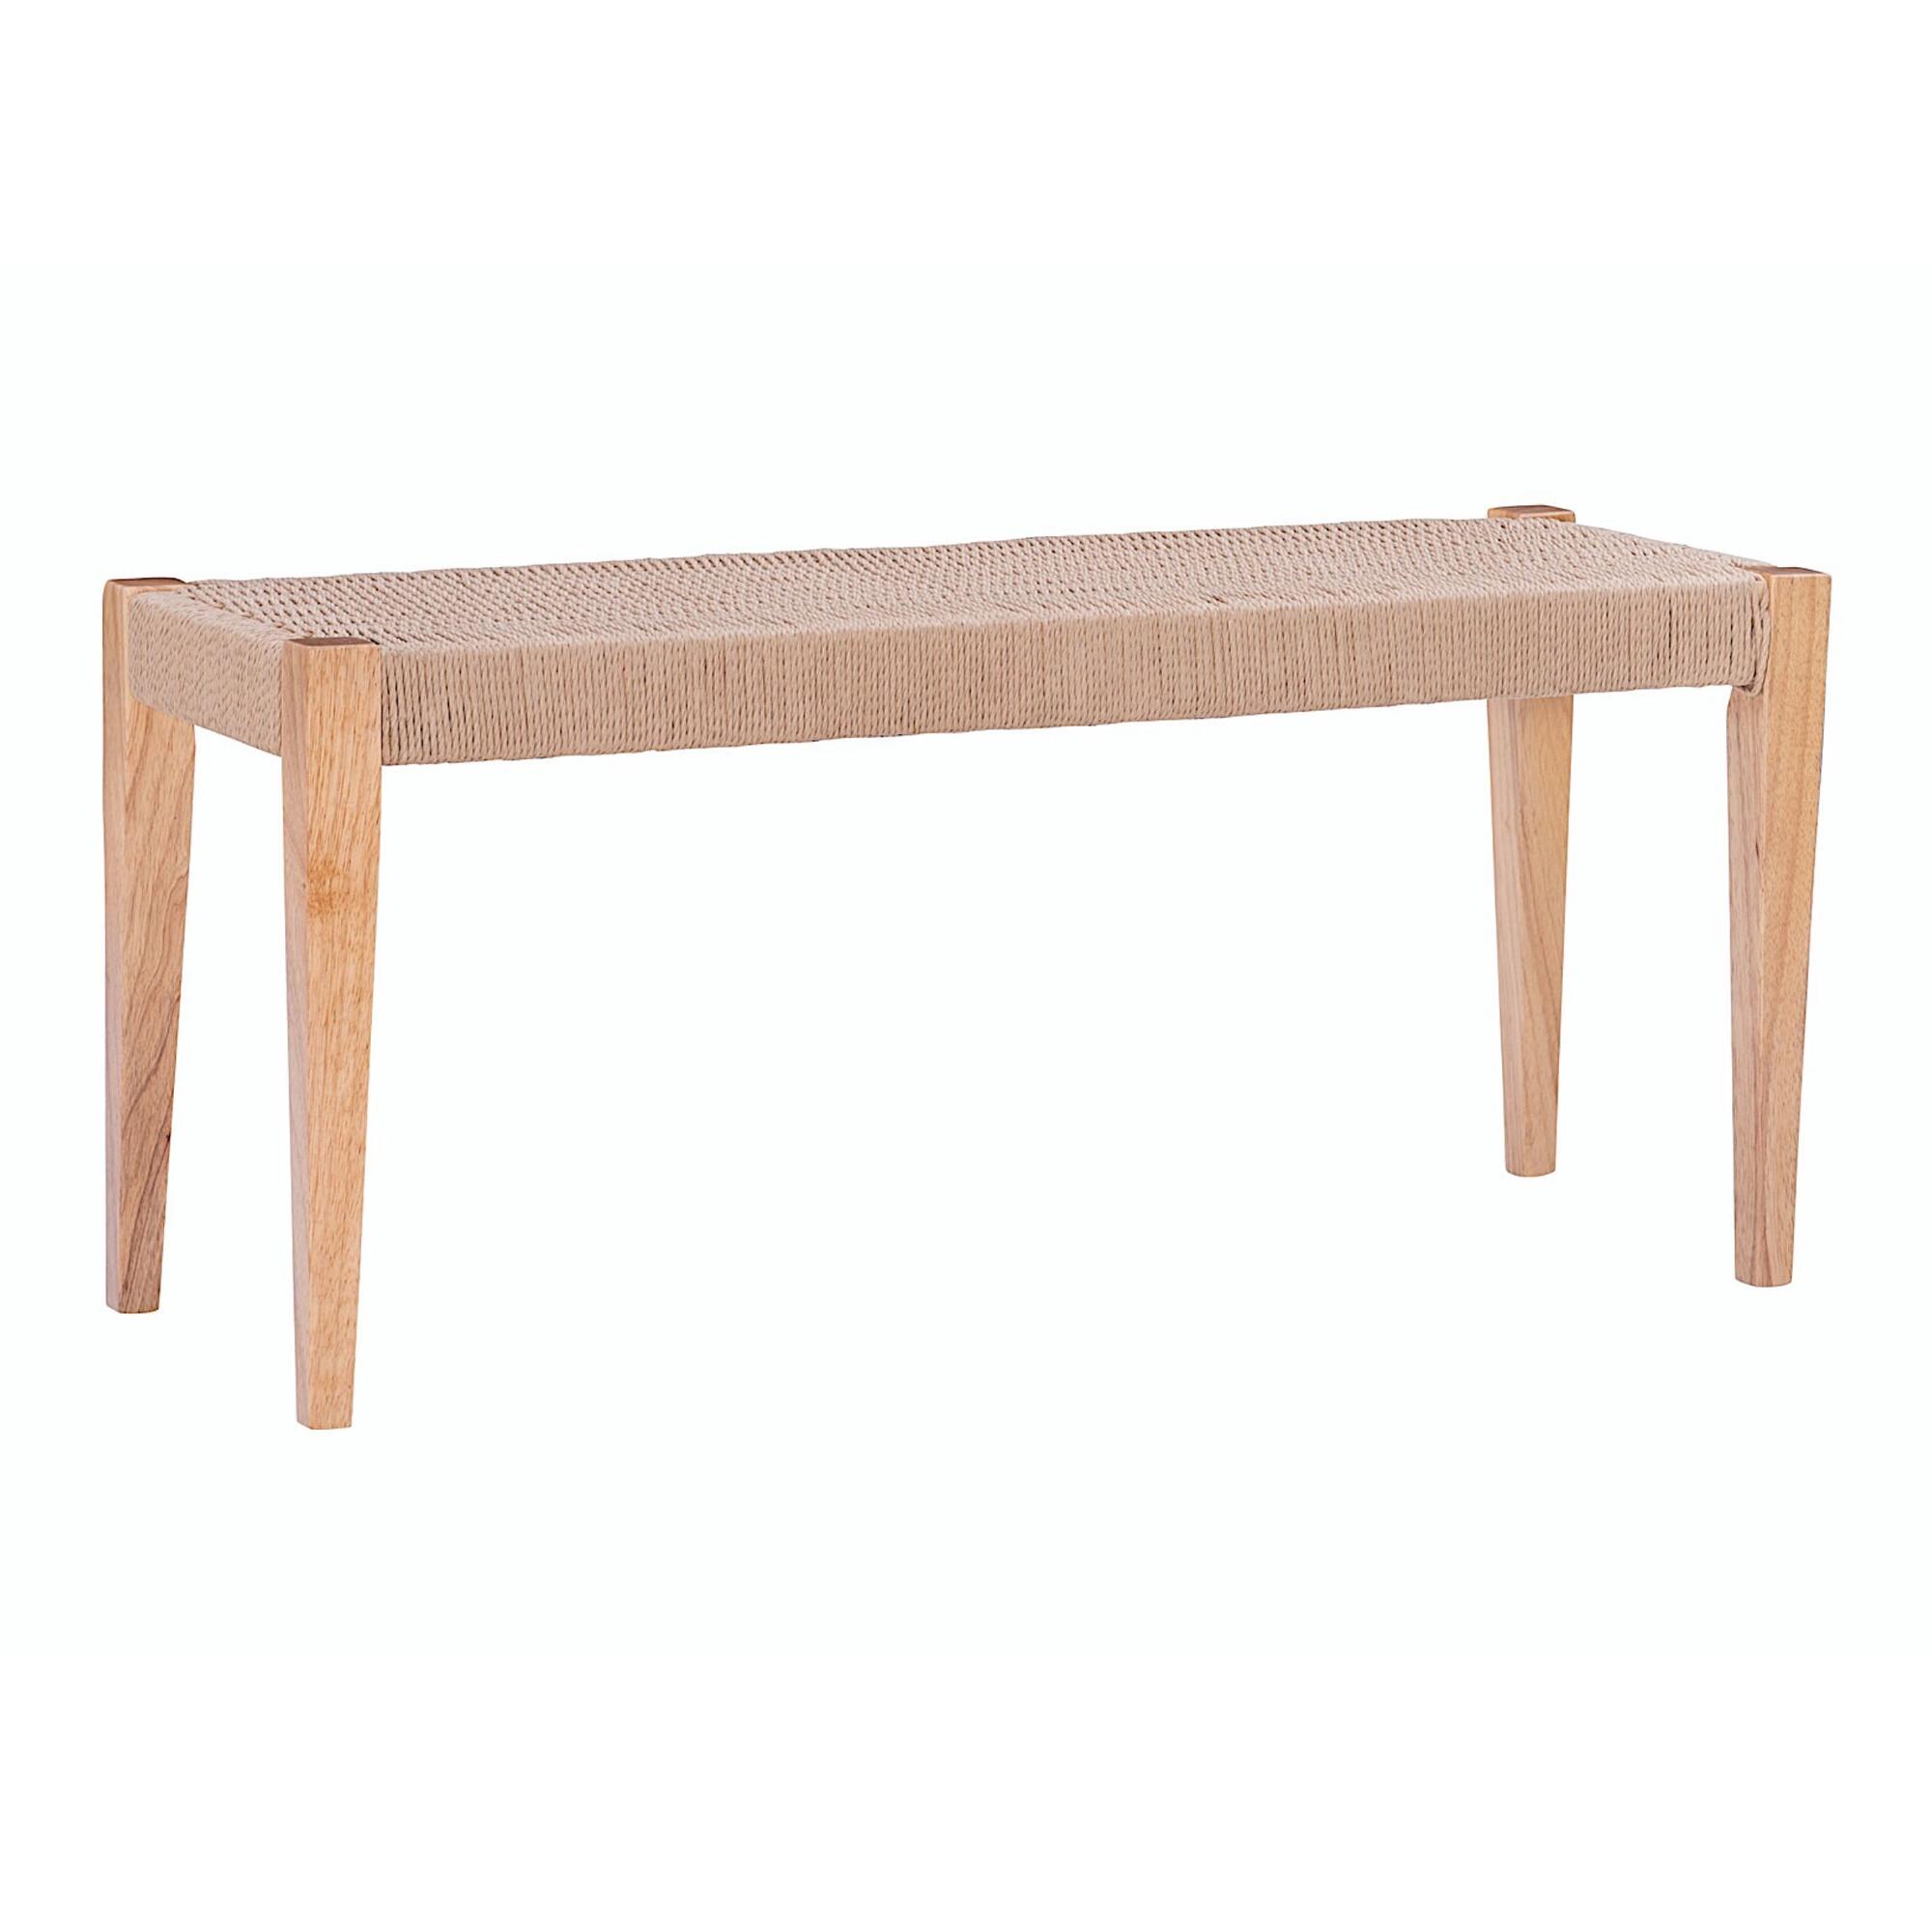 Wood and Woven Rope Morgan Dining Bench: Brown by World Market